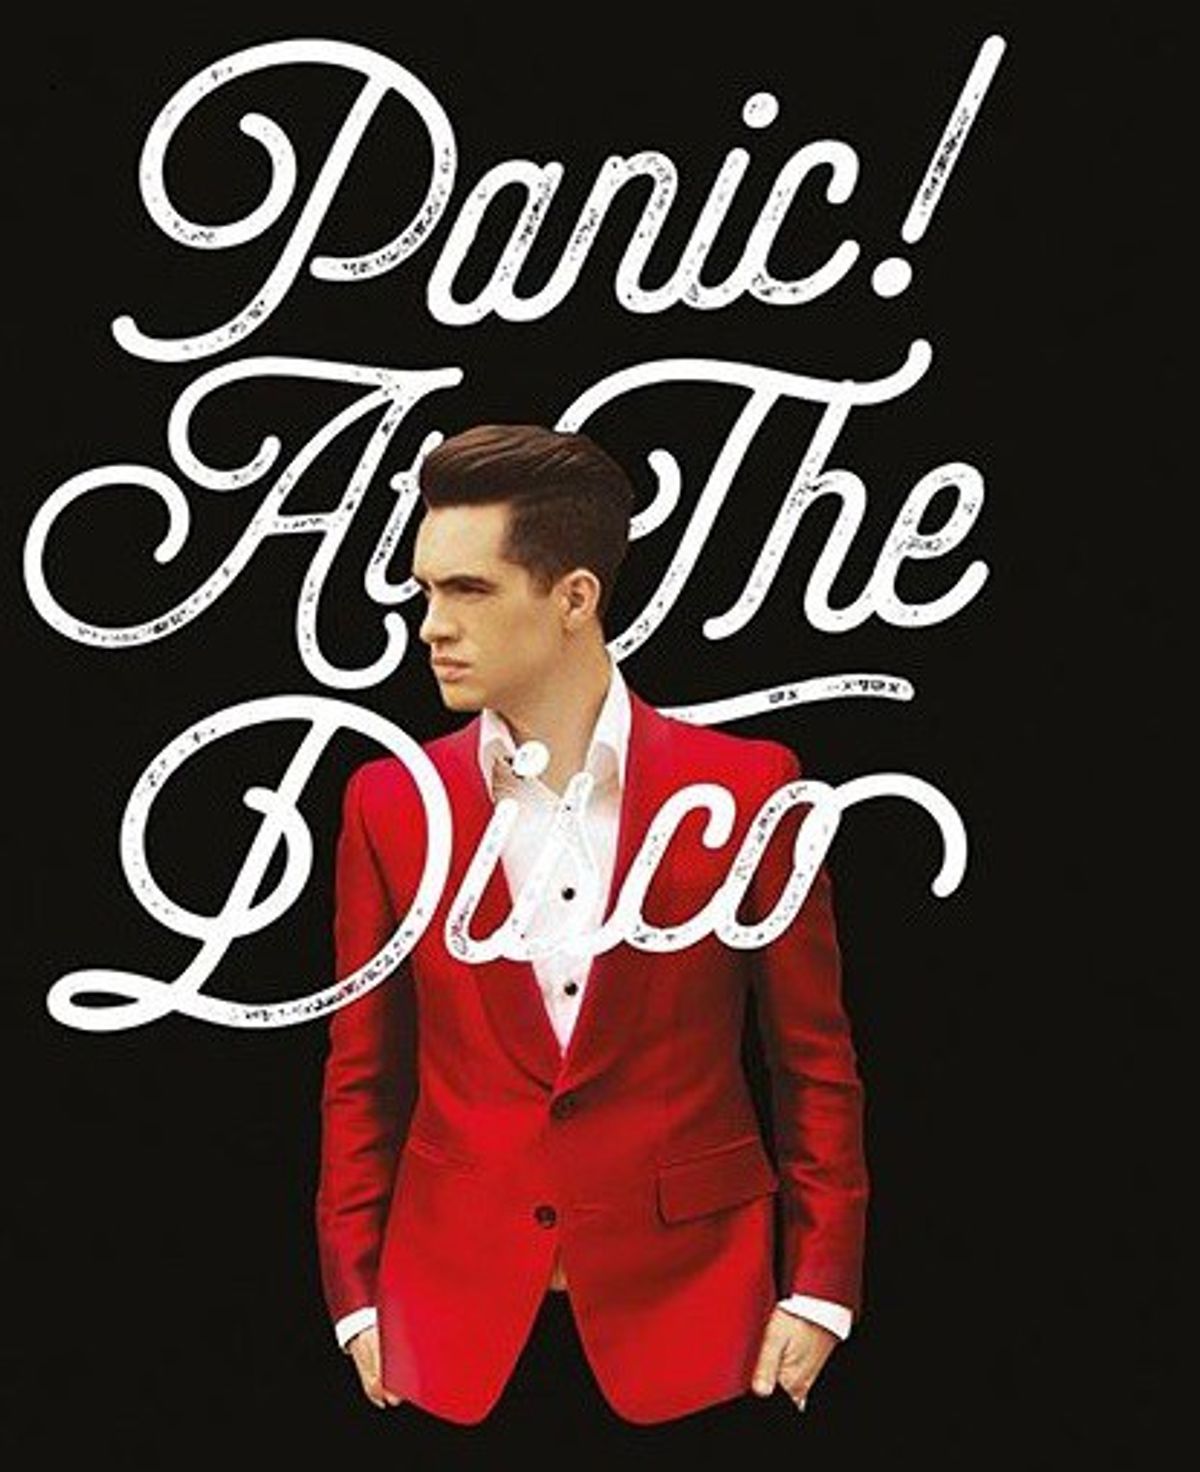 Top 10 Panic! At The Disco Music Videos